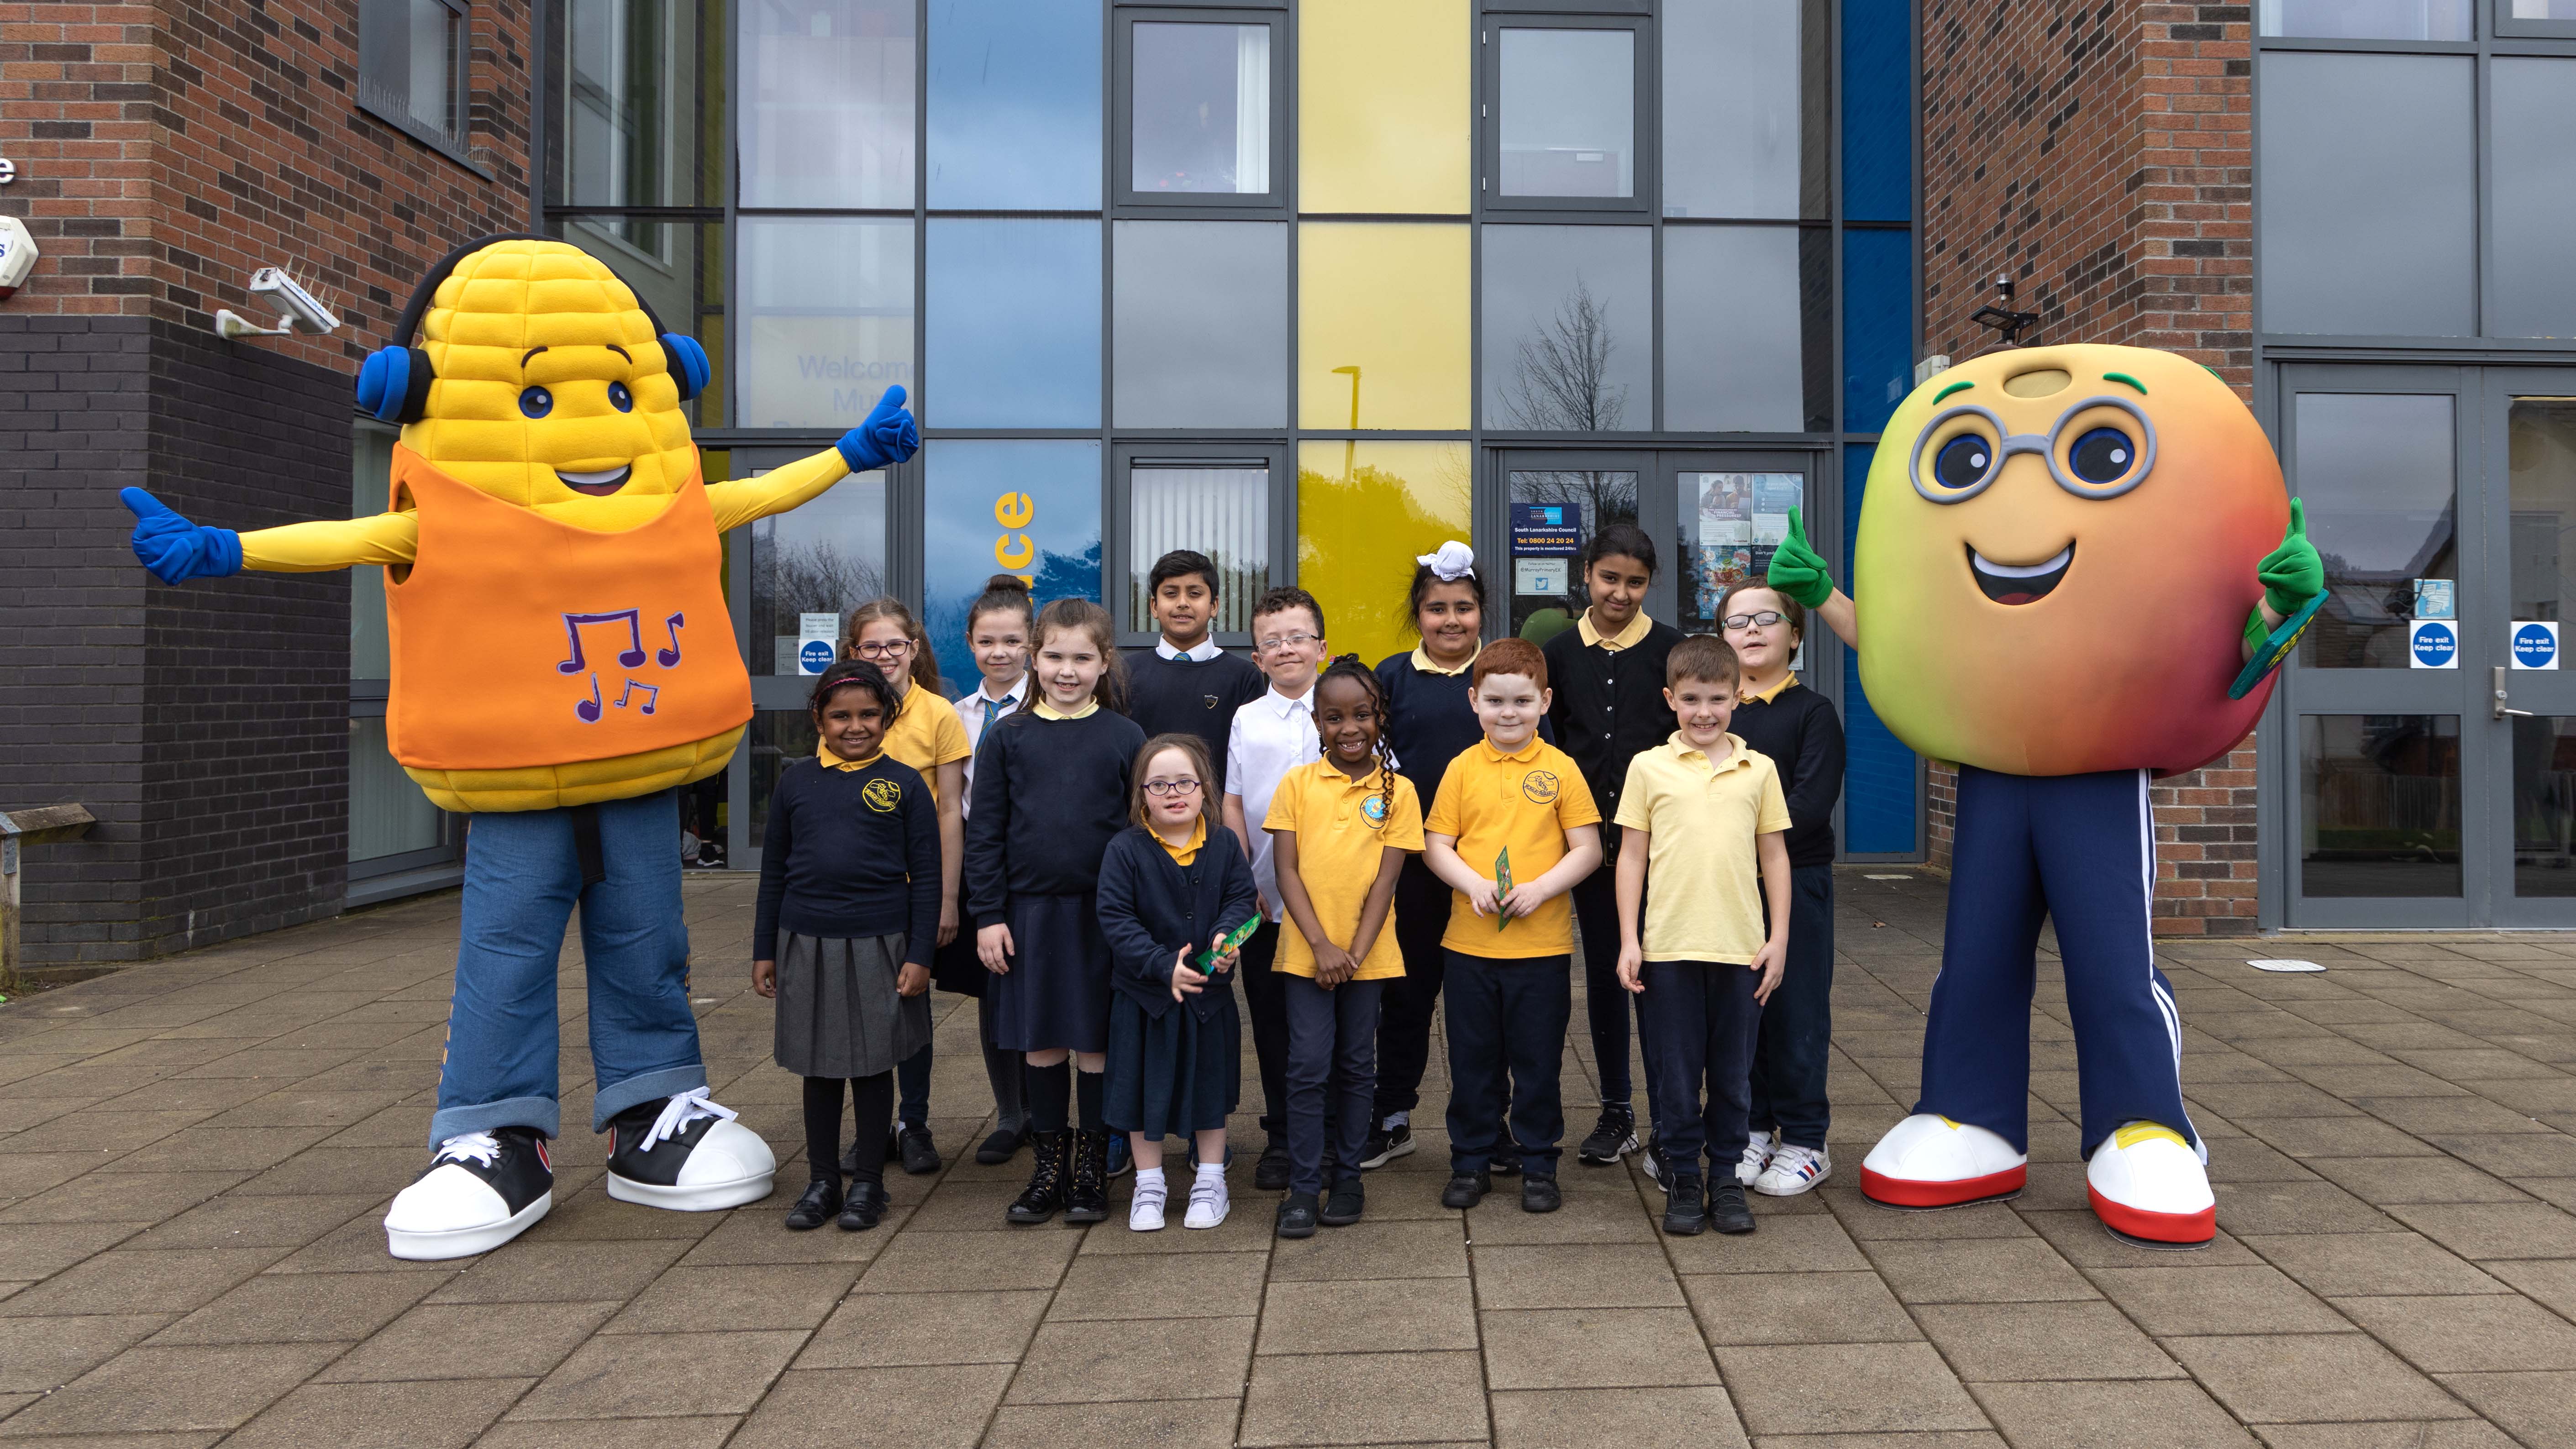 Go Fresh characters promote World Book Day